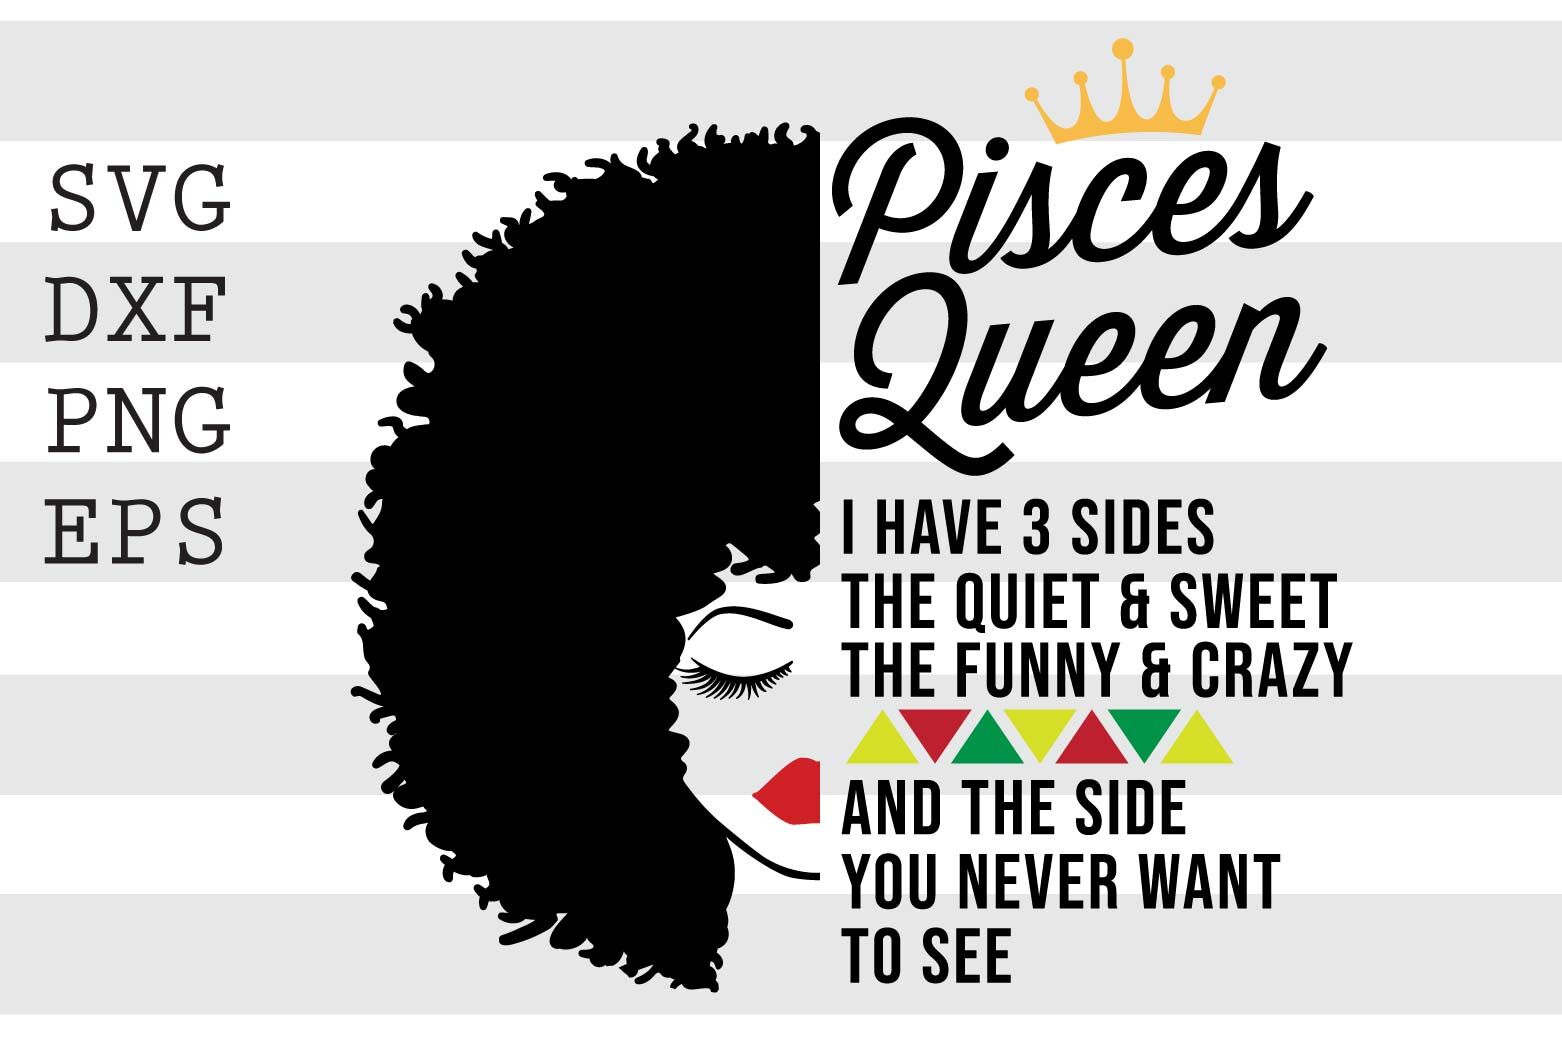 Pisces queen I have 3 sides the quiet and sweet the funny and crazy an By  spoonyprint | TheHungryJPEG